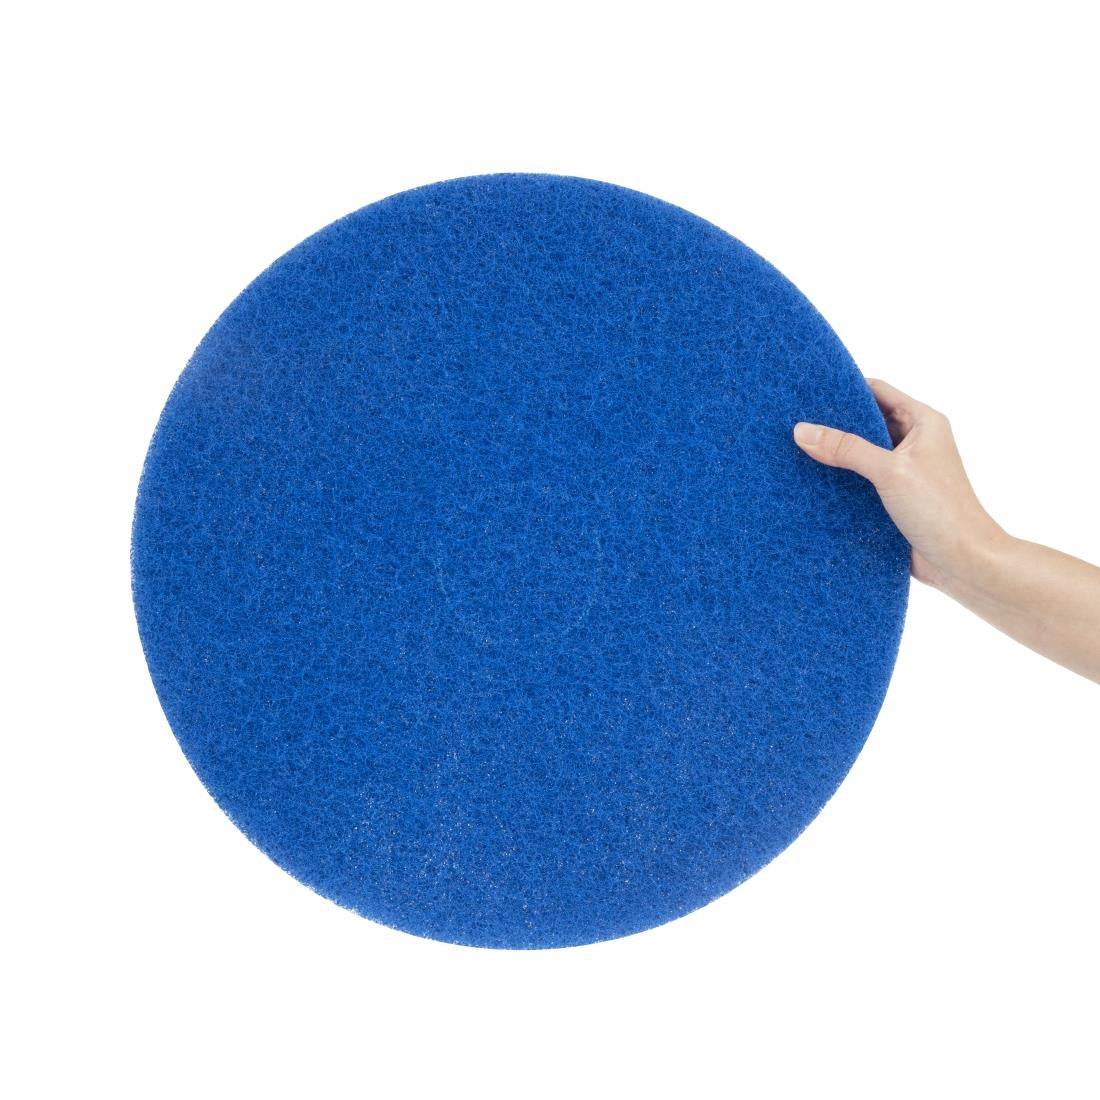 CC092 SYR Floor Cleaning Pad Blue (Pack of 5)